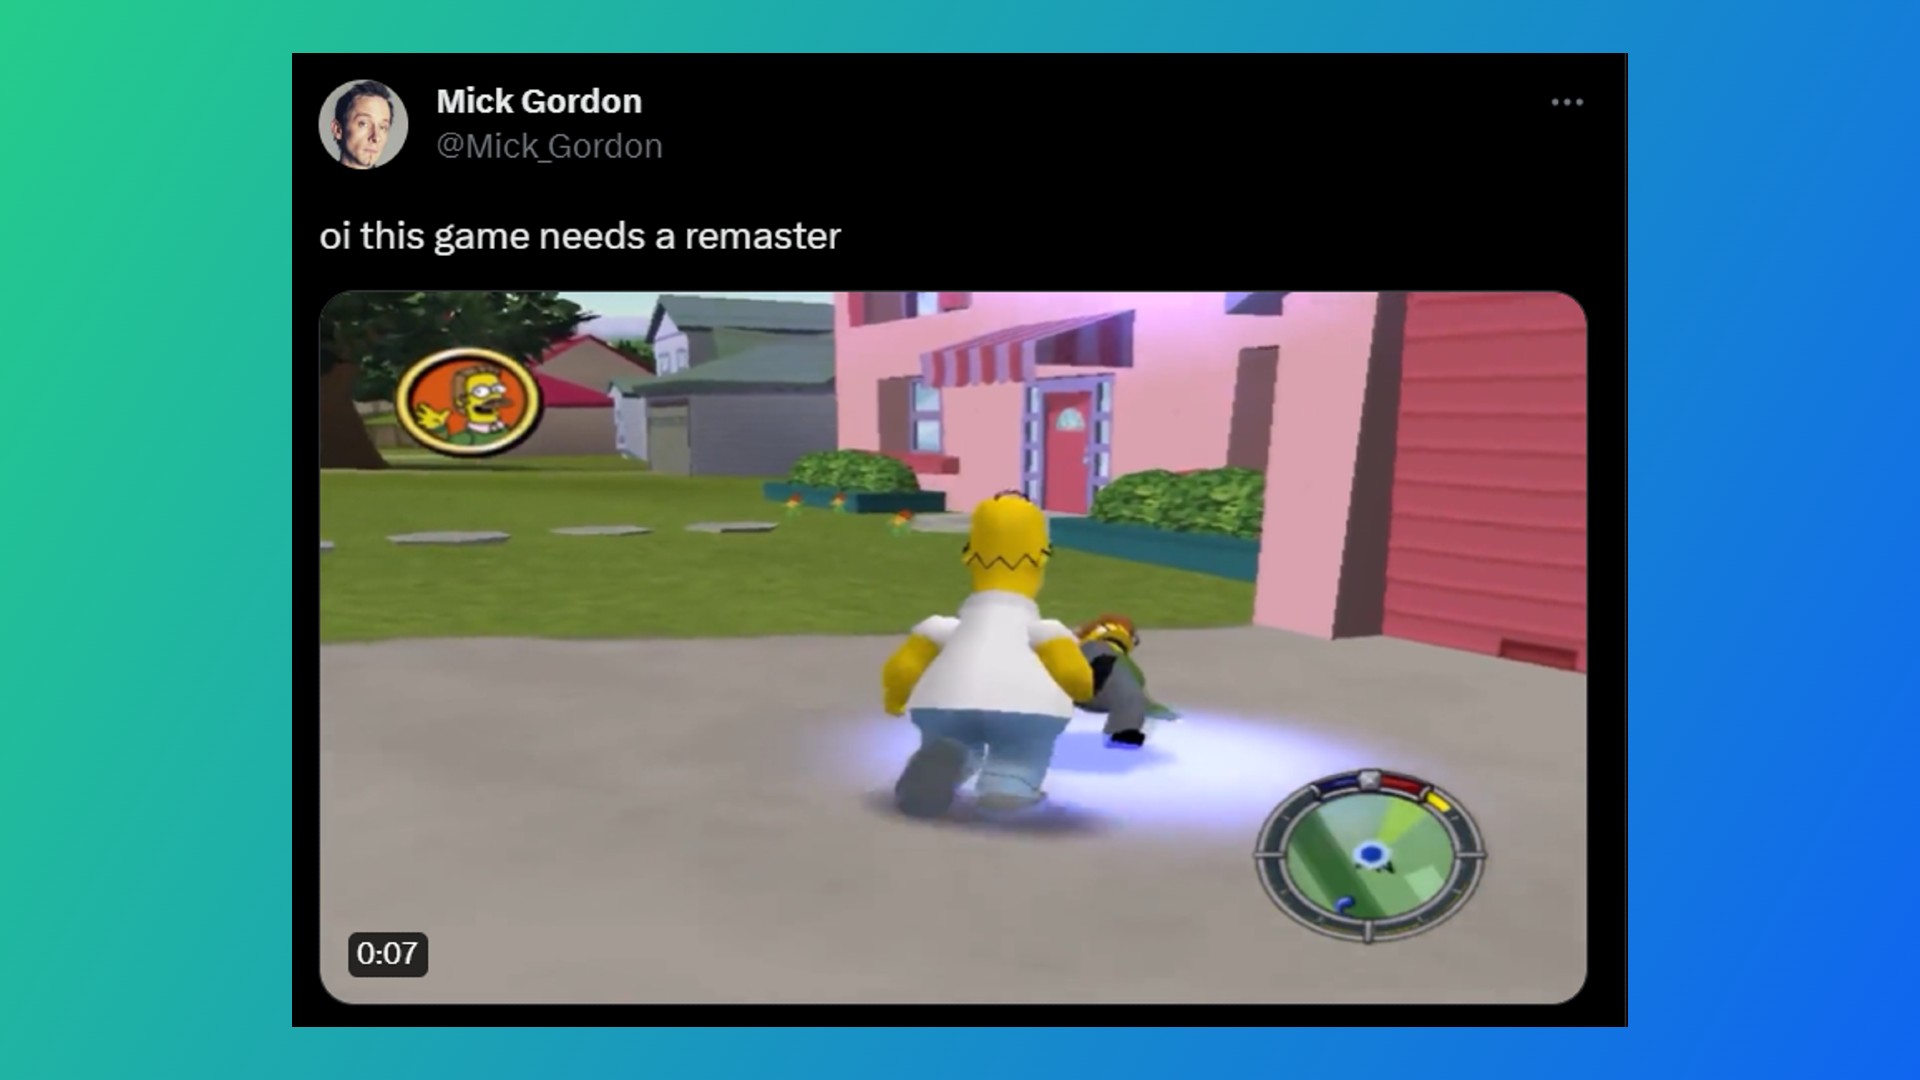 Simpsons Hit and Run remaster: A tweet from Doom composer Mick Gordon about a Simpsons Hit and Run remaster